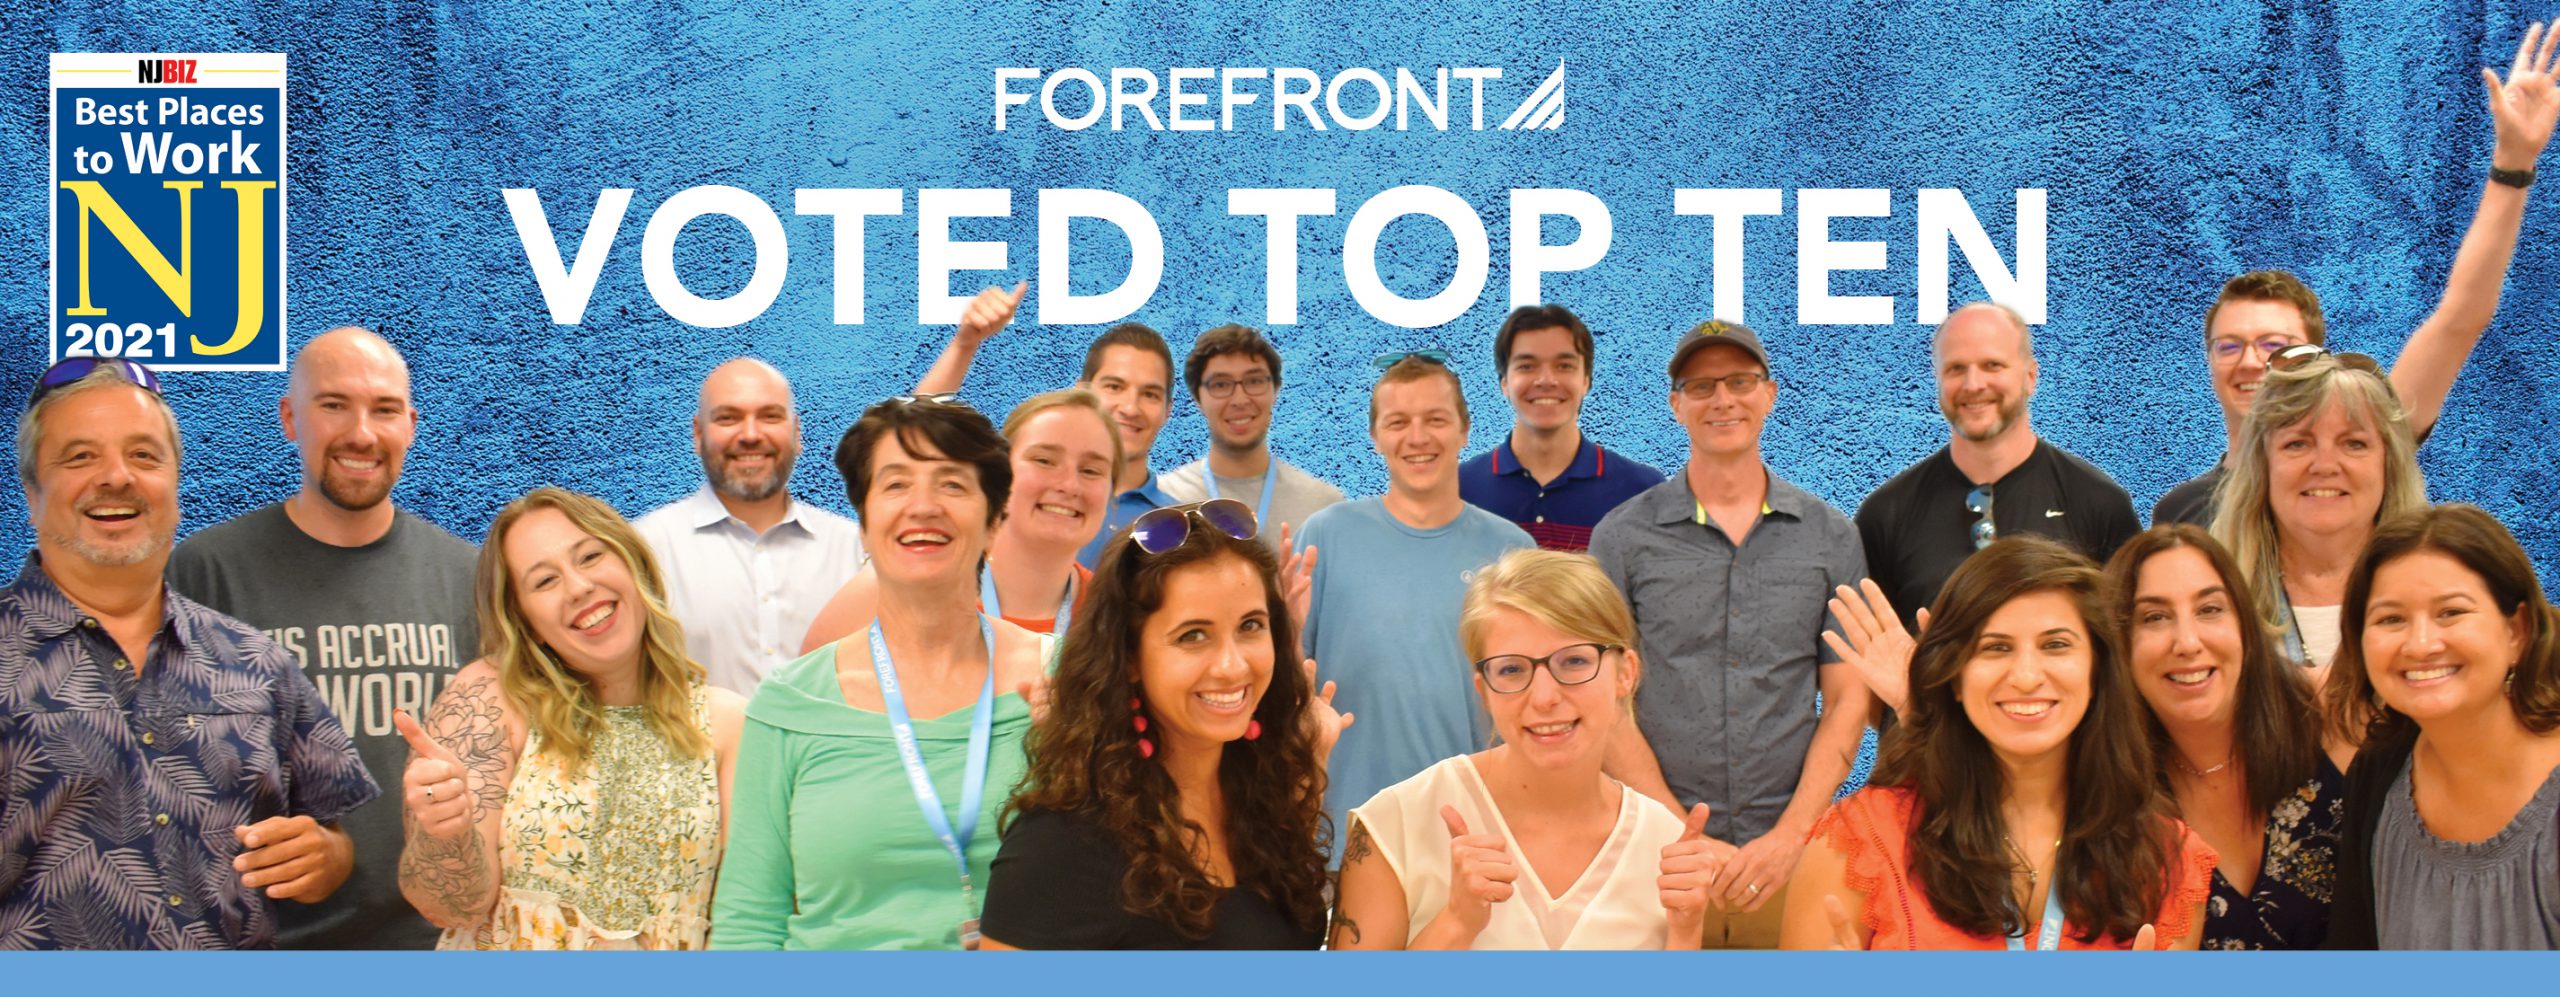 Group photo of ForeFront Team smiling together, with text "Voted Top Ten"